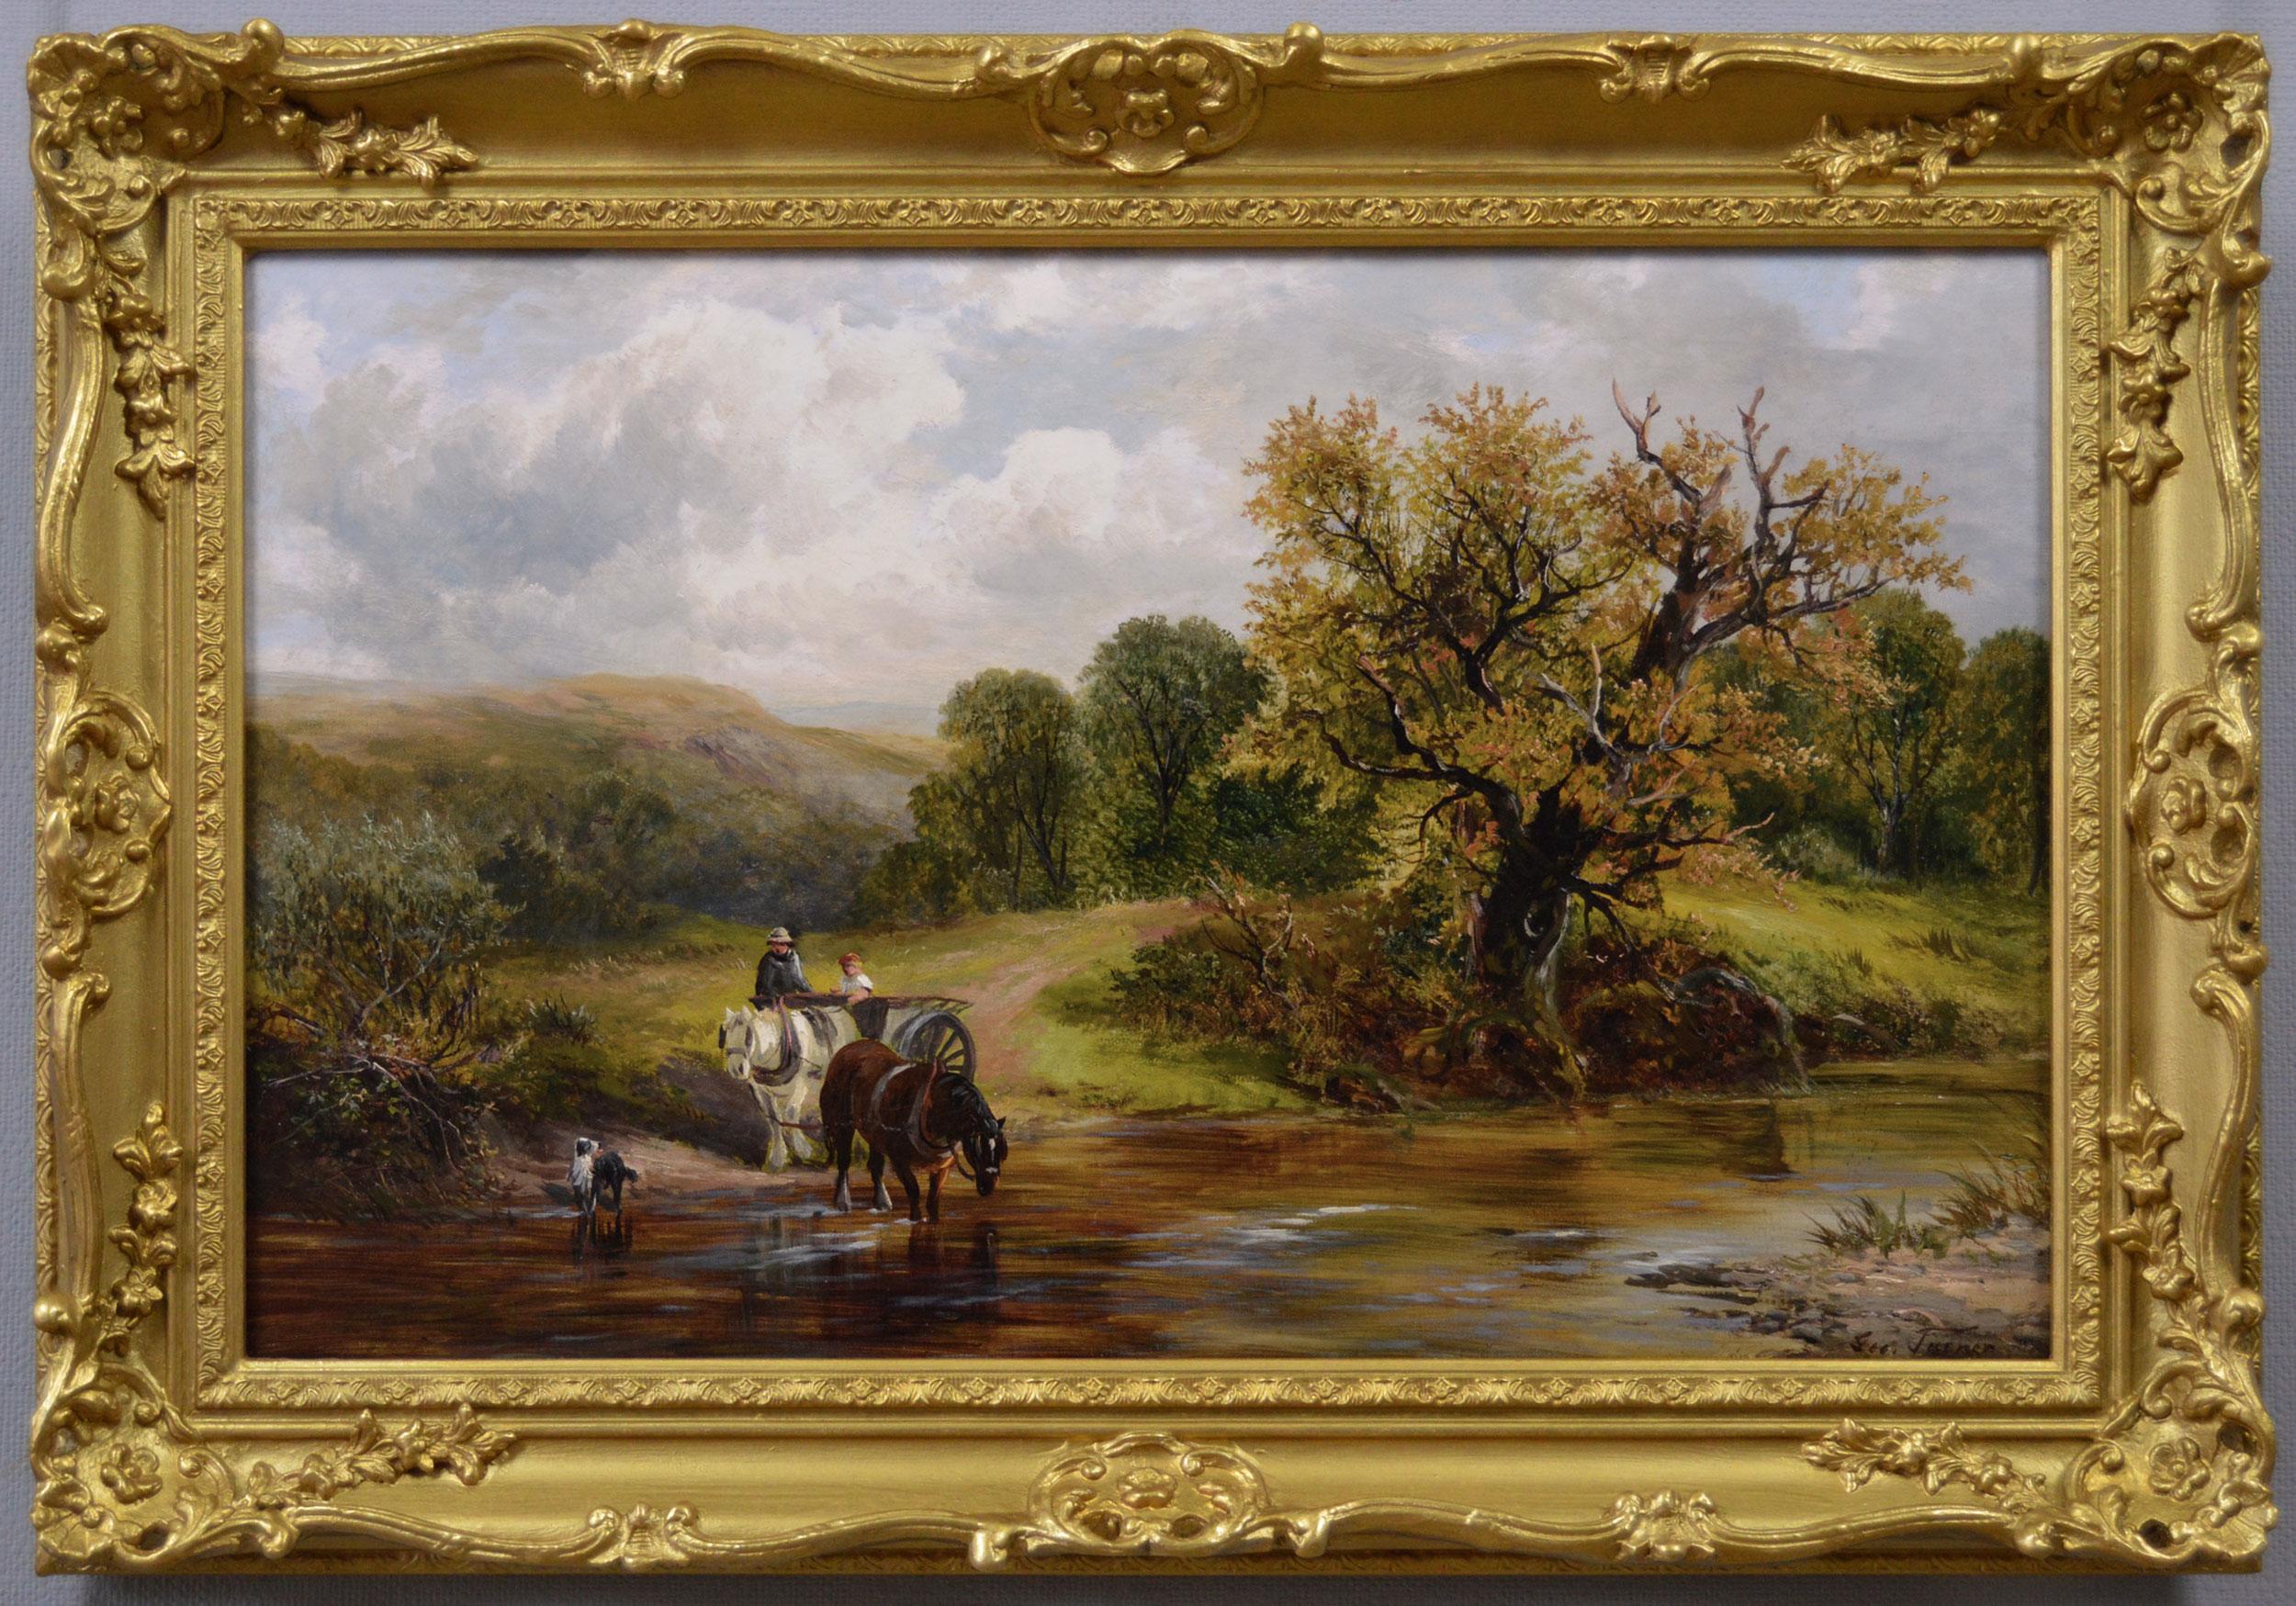 19th Century landscape oil painting of figures in a horse & cart crossing a ford